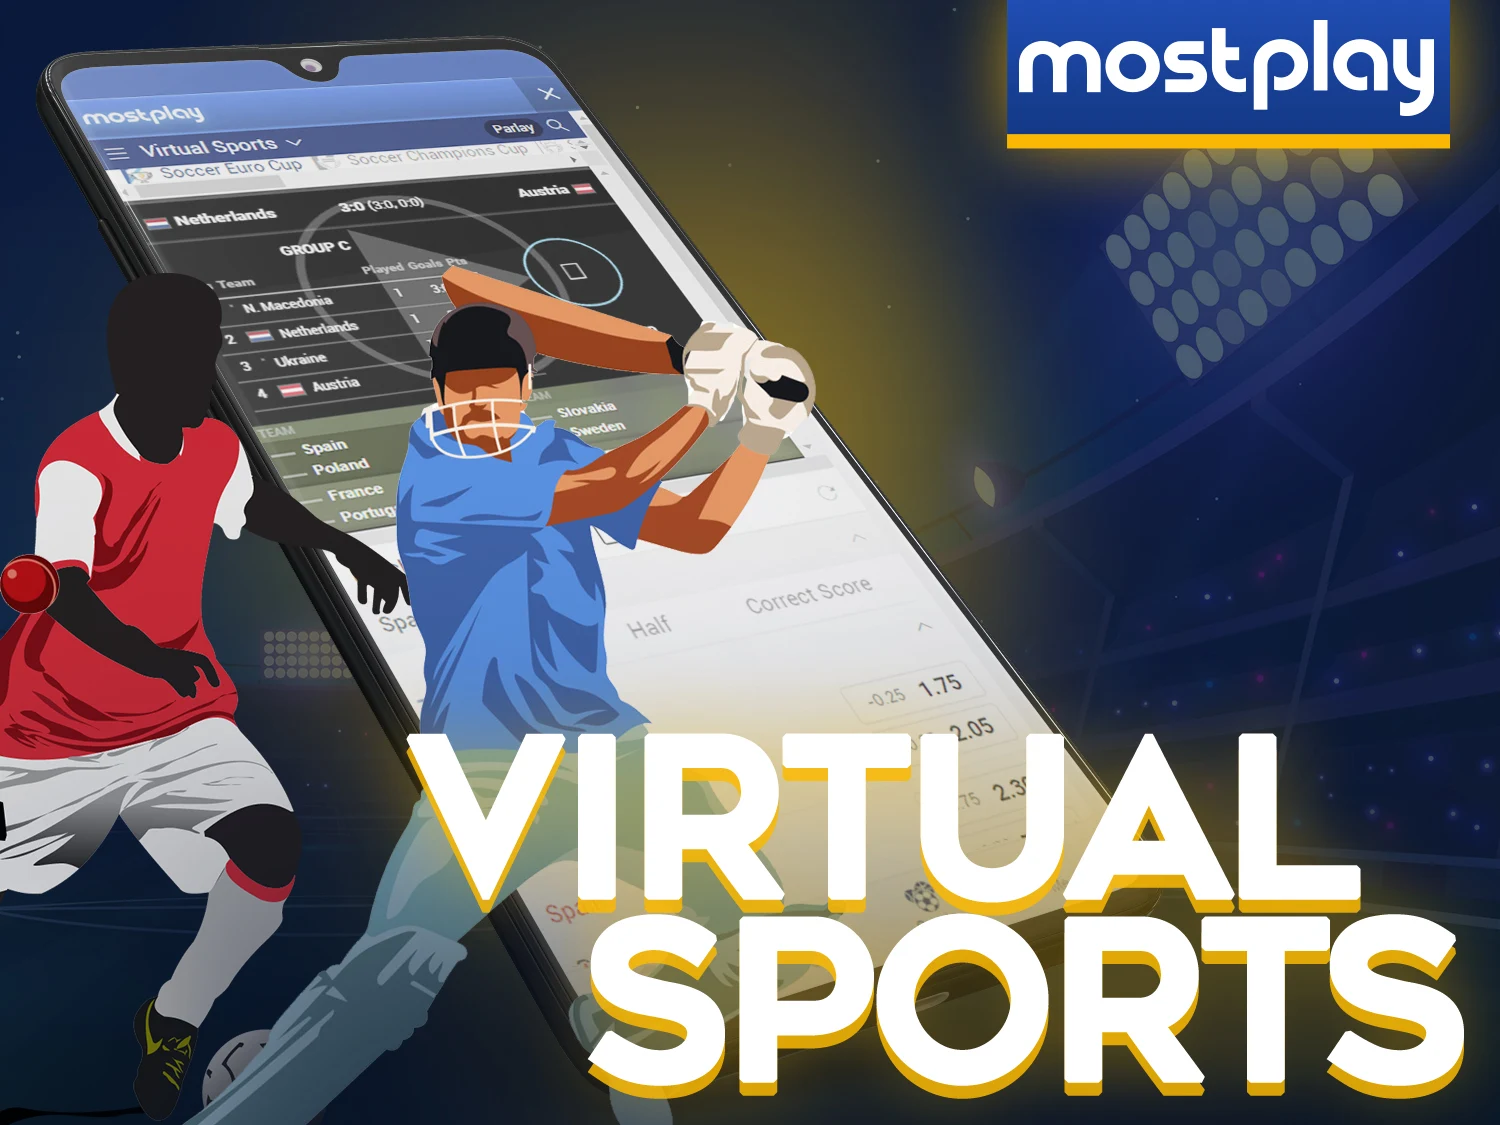 Bet on new exotic virtual sports on the Mostplay virtual sports page.